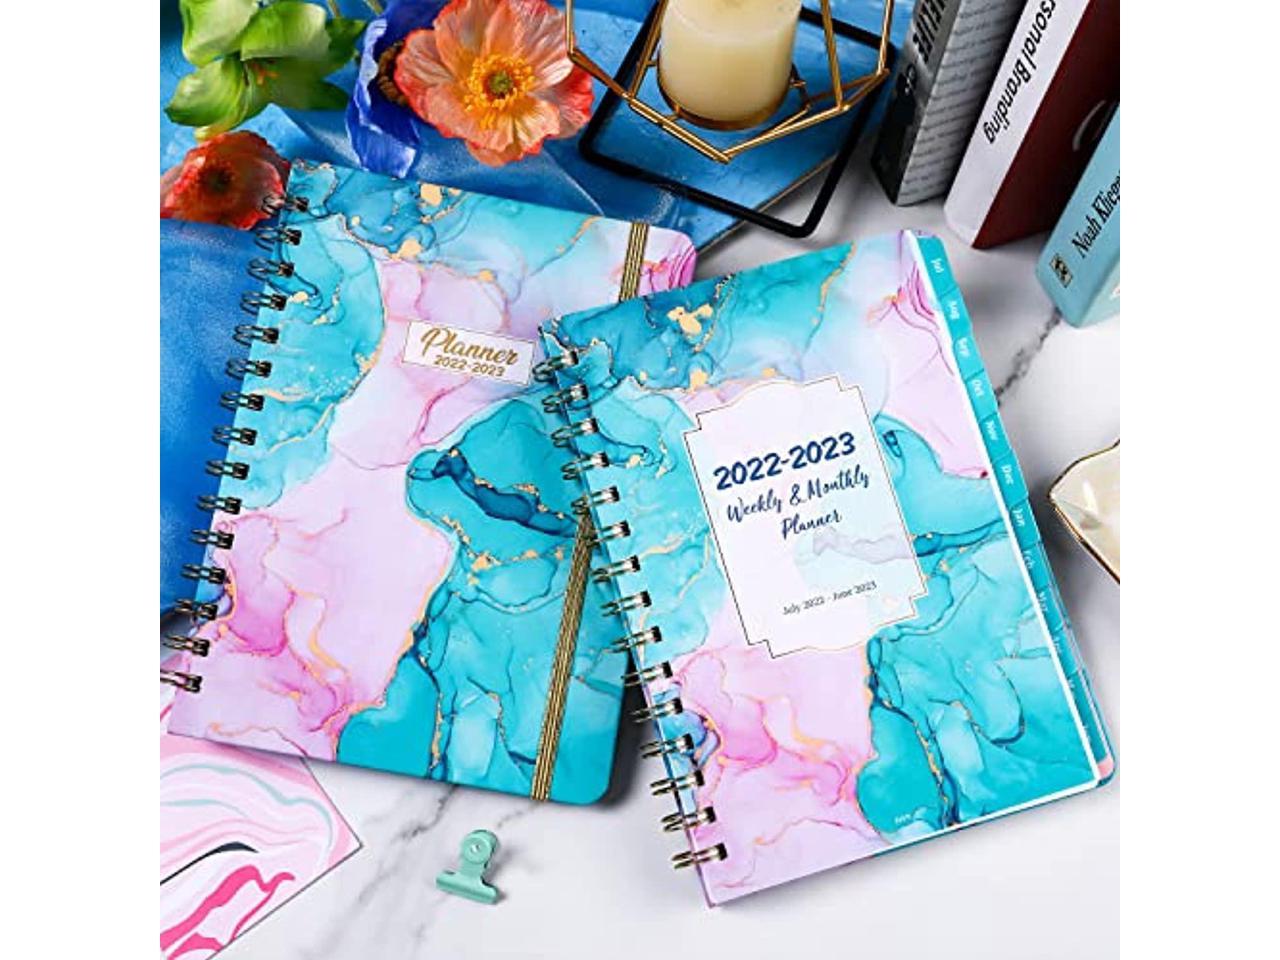 6.3'' × 8.4'' Planner 2022-2023 Weekly Monthly Planner 2022-2023 with 12 Monthly Tabs Strong Twin-Wire Binding June 2023 Inner Pocket Elastic Closure Academic Planner 2022-2023 from July 2022 